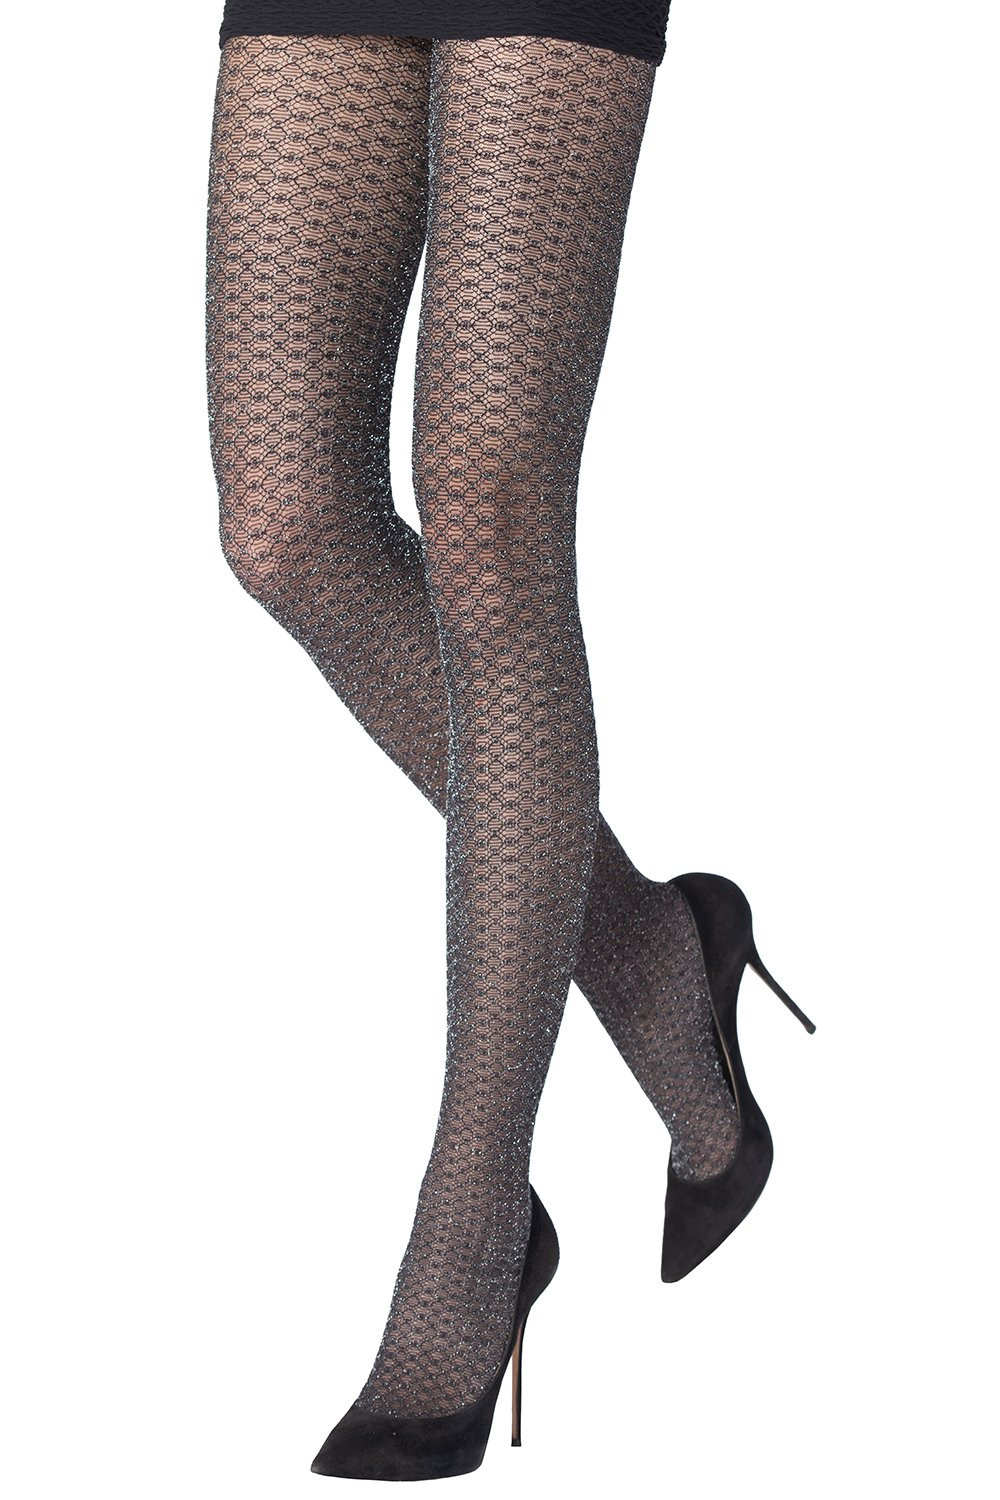 Lavinia Tights  Accessories, Hosiery :Beautiful Designs by April Cornell